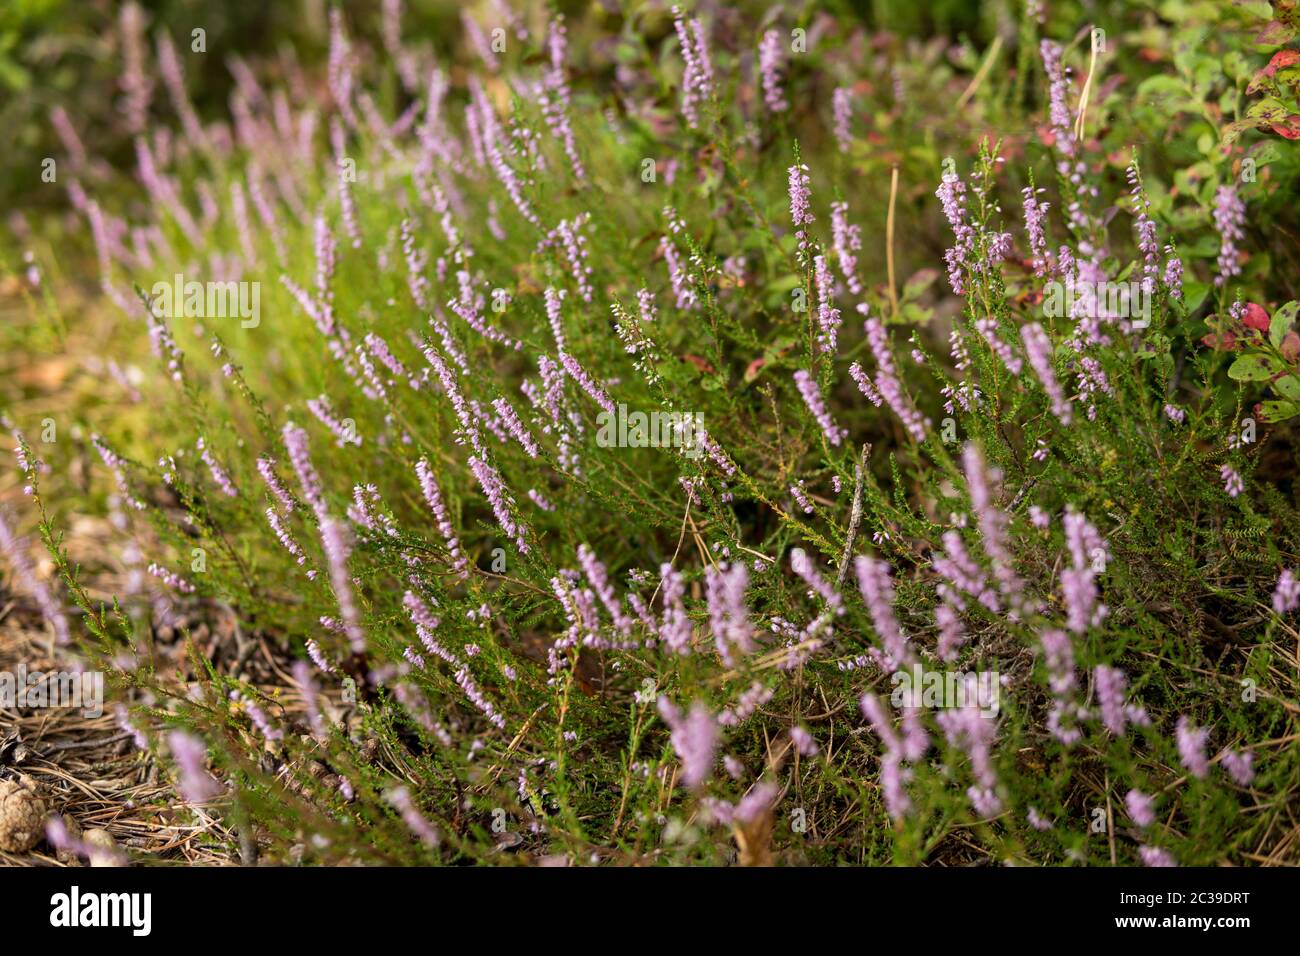 close up of purple flowers of heather growing in a forest Stock Photo